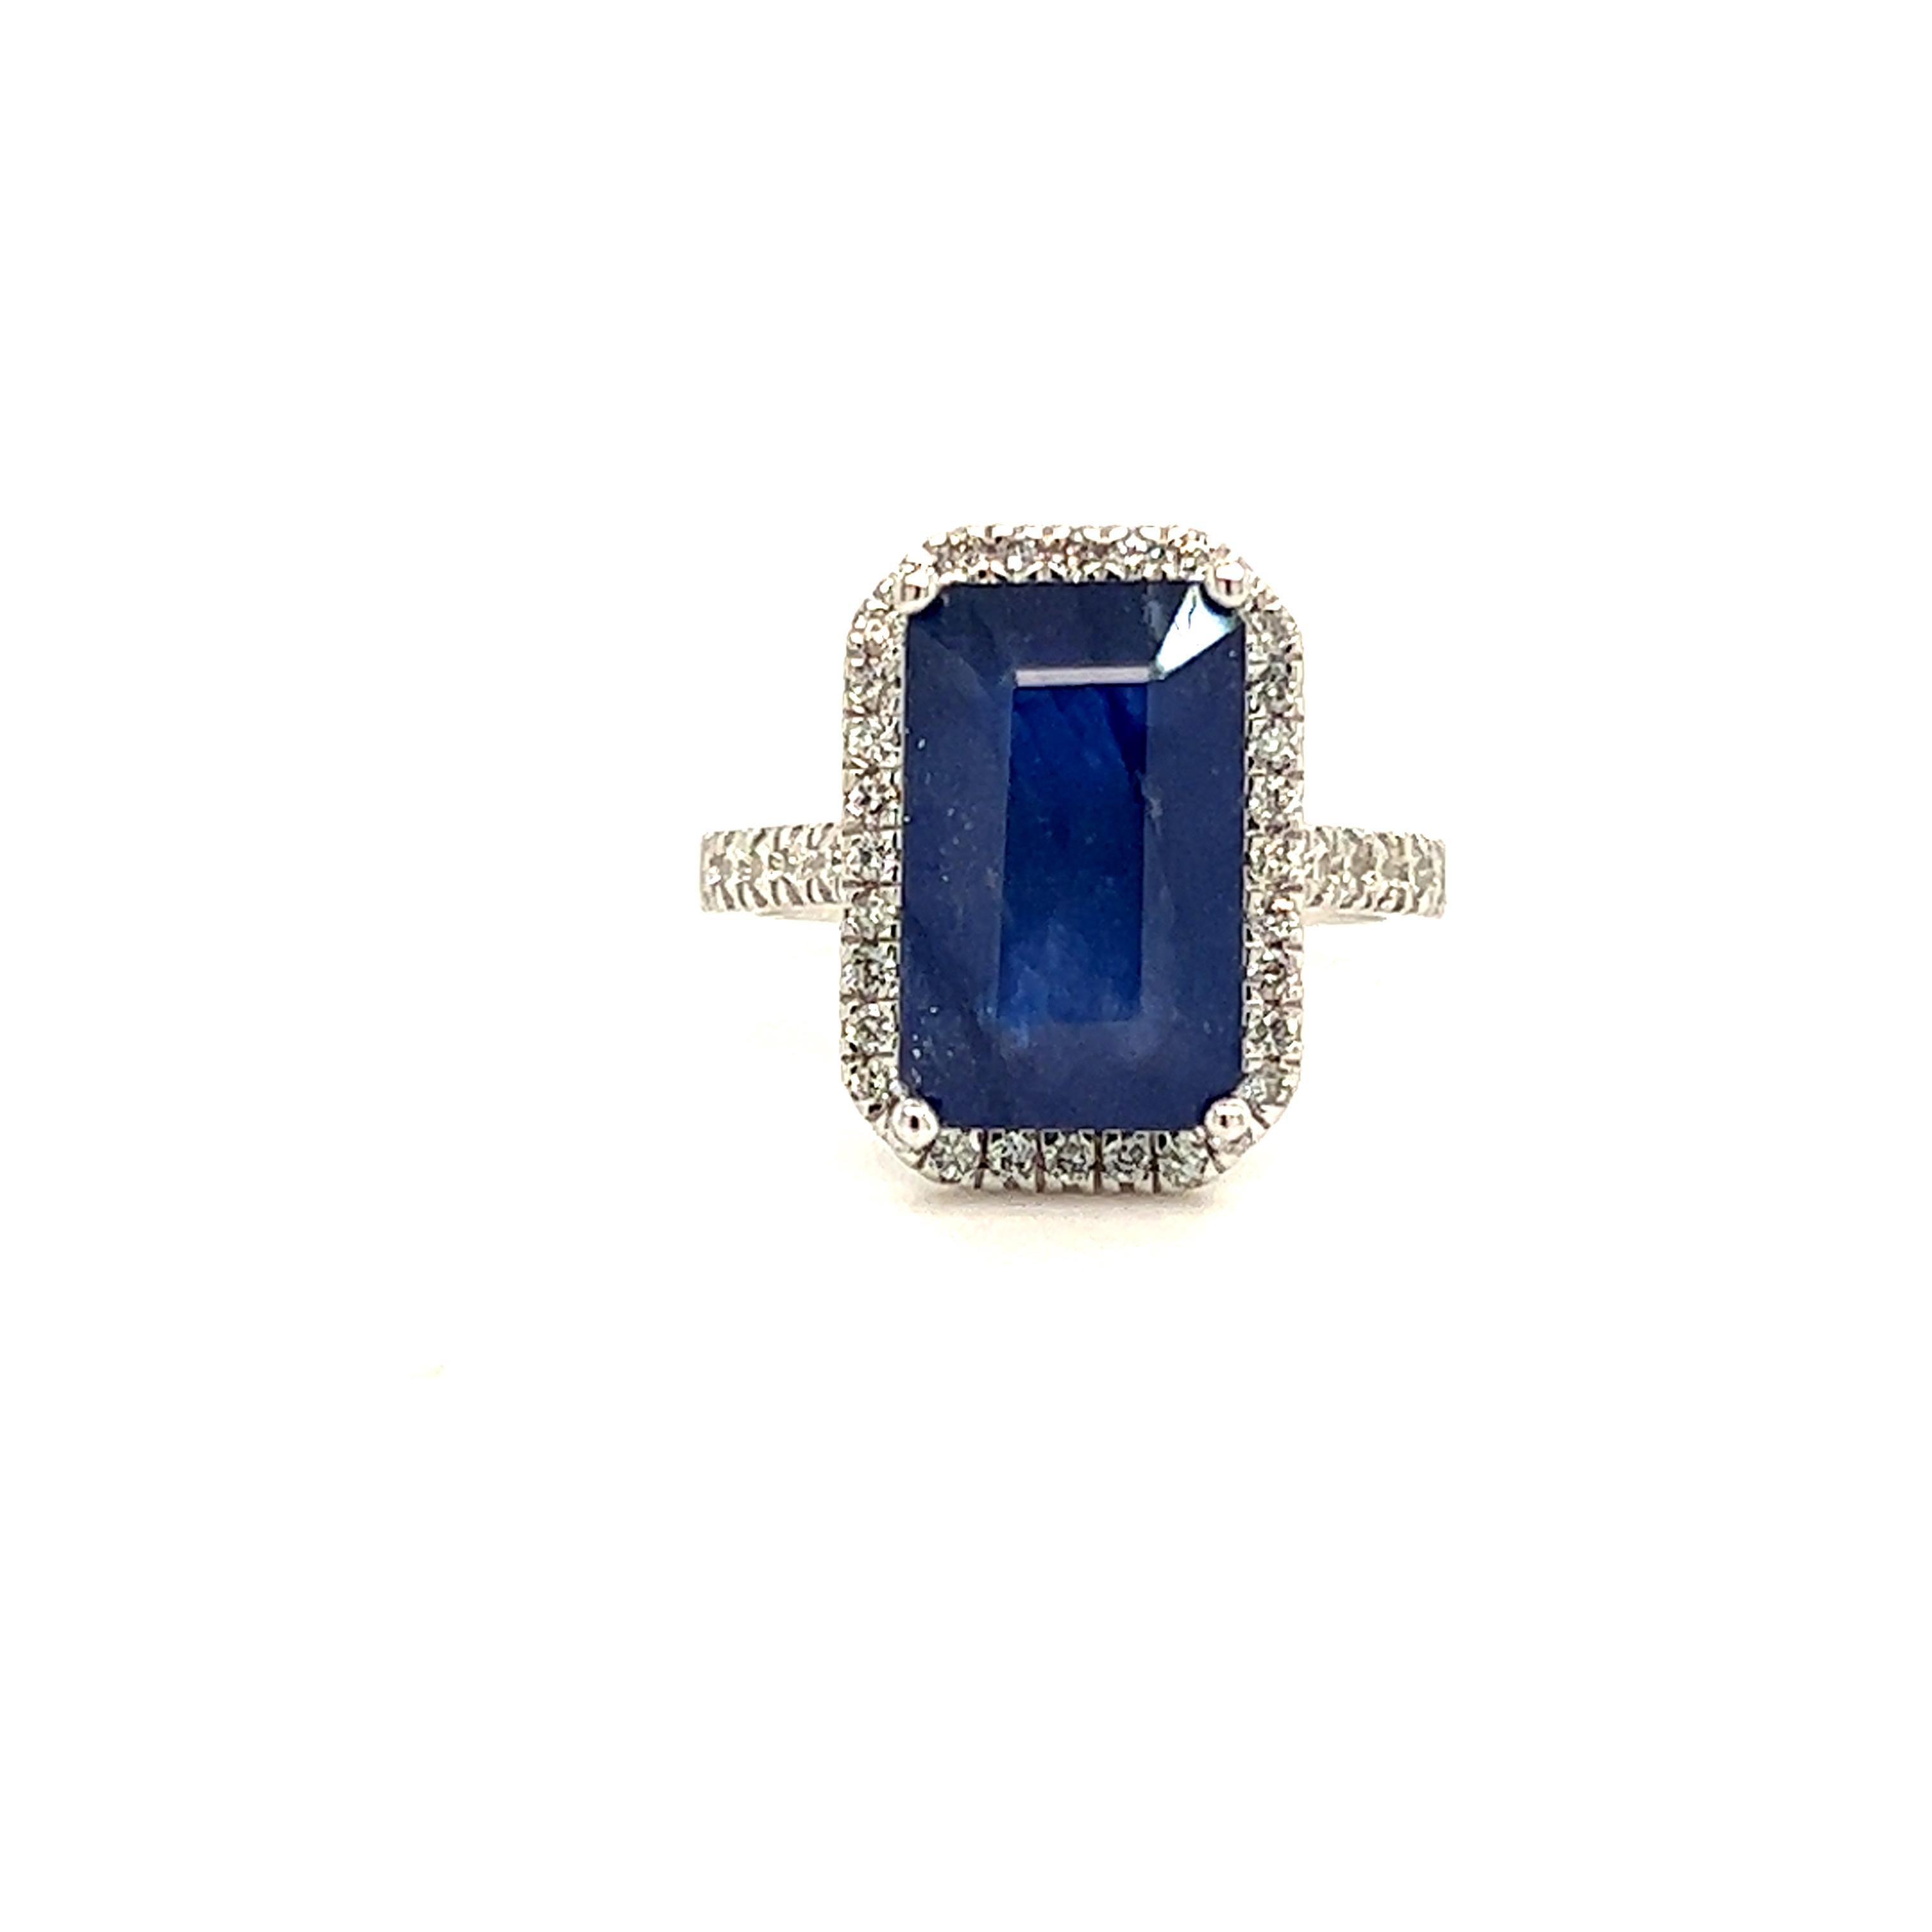 Sapphire Diamond Ring Size 6.25 14k Gold 6.84 TCW Certified In New Condition For Sale In Brooklyn, NY